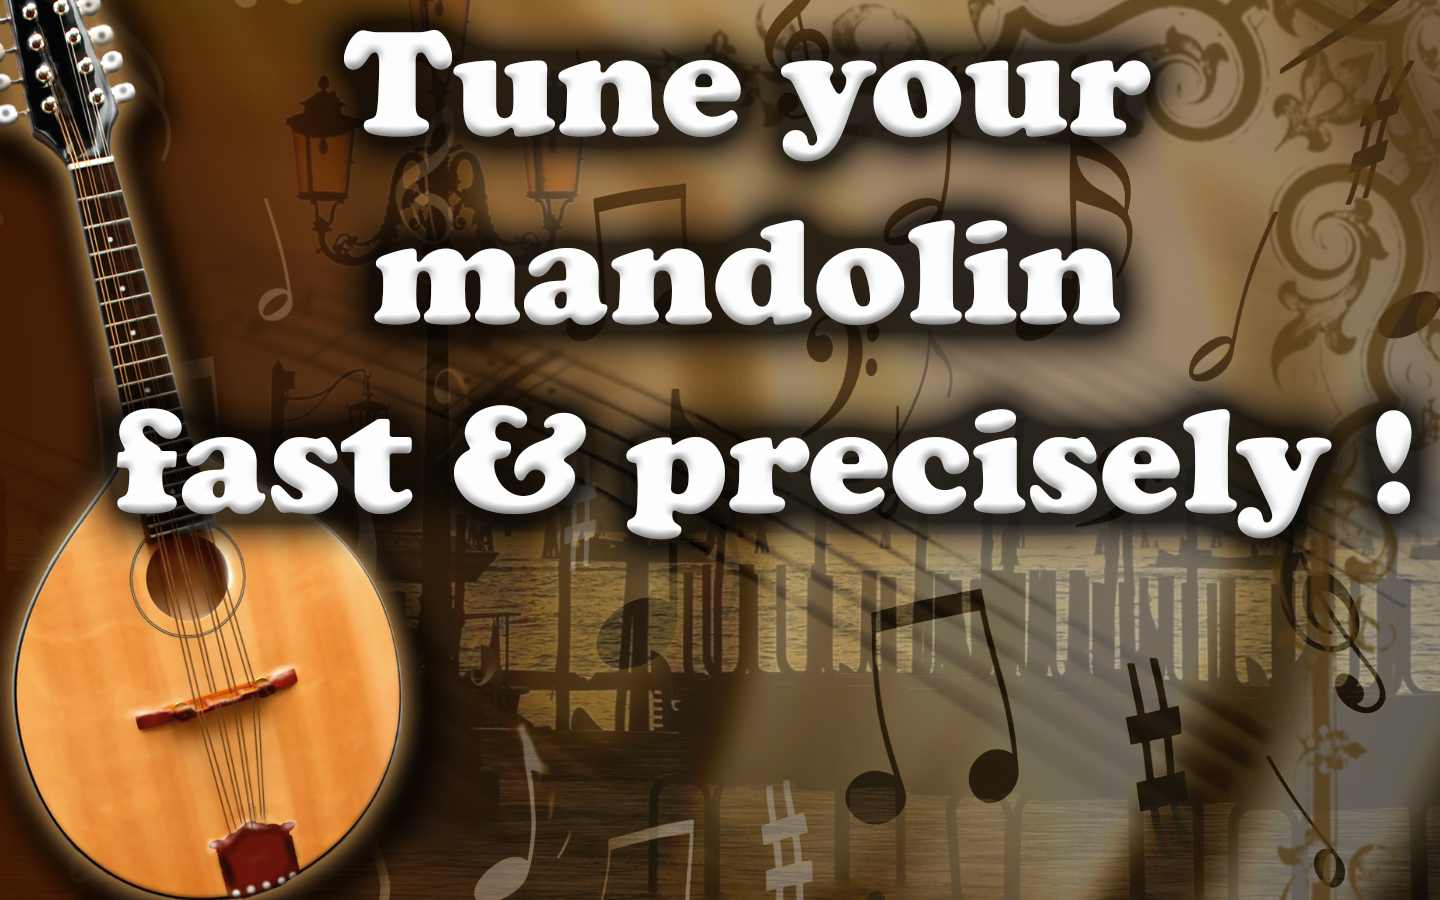 tune-your-mandolin-fast-and-precisely0